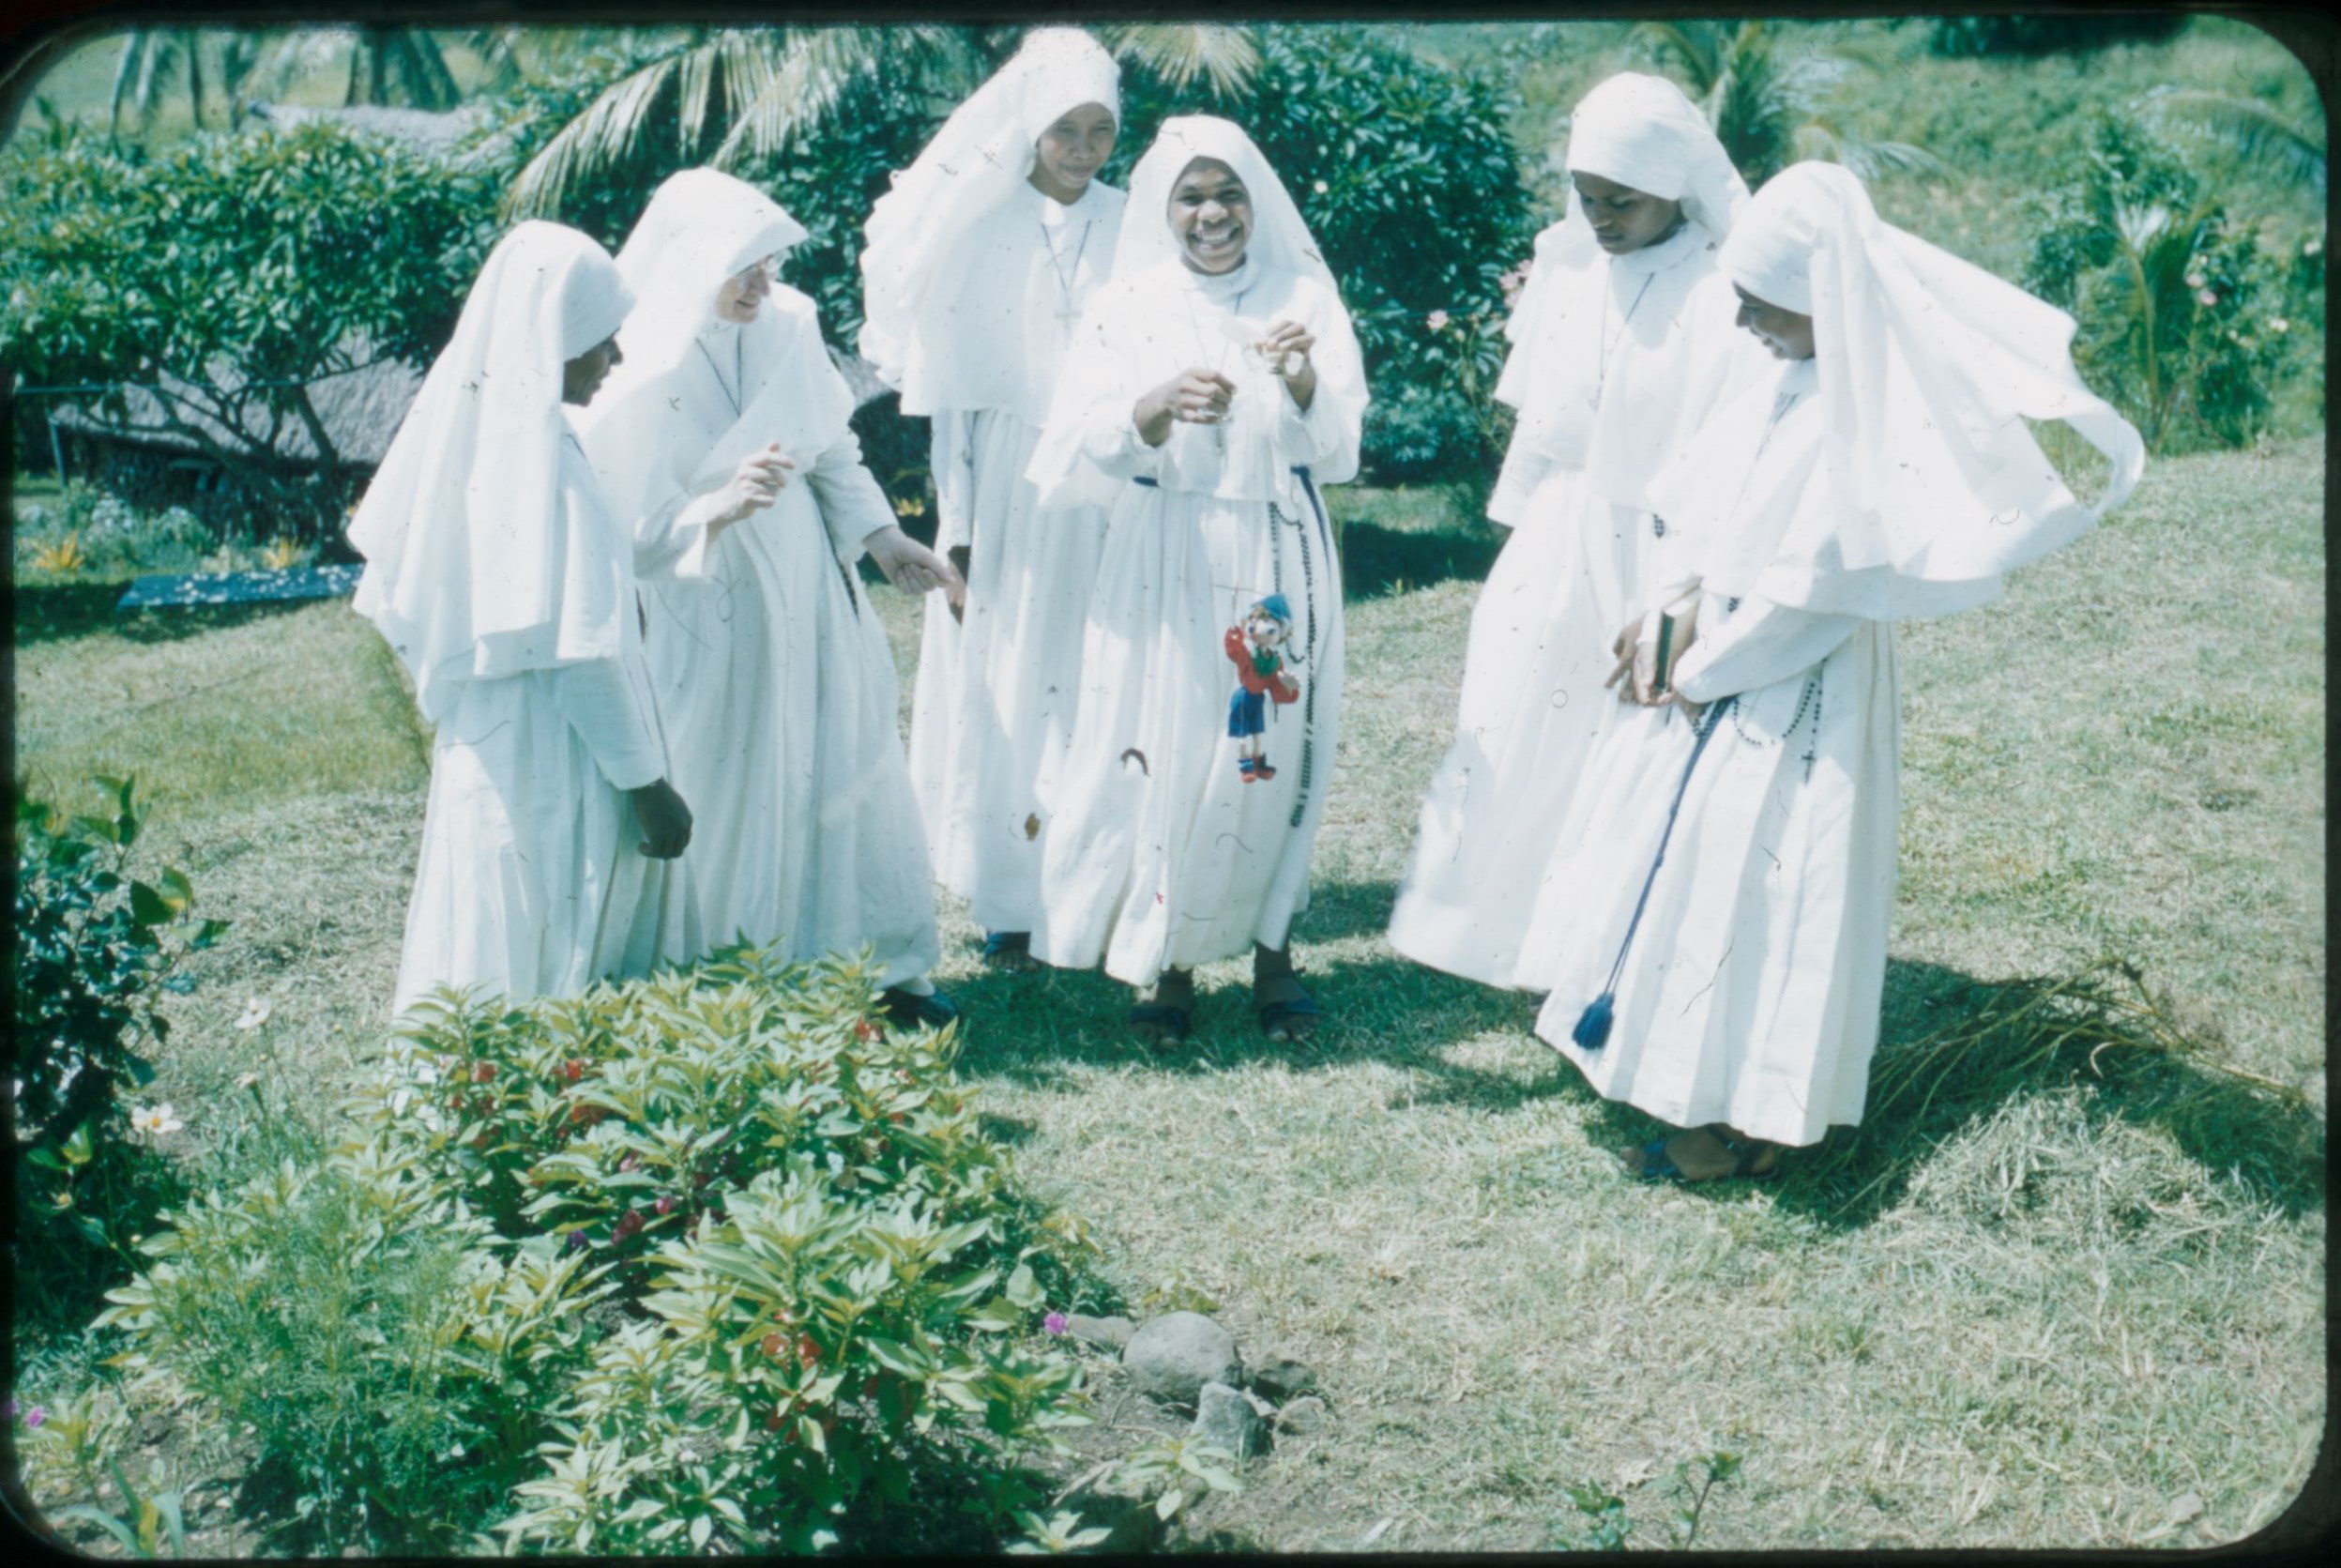 Sr Baptist Whyte and novices playing with a puppet, ca 1958-ca 1961